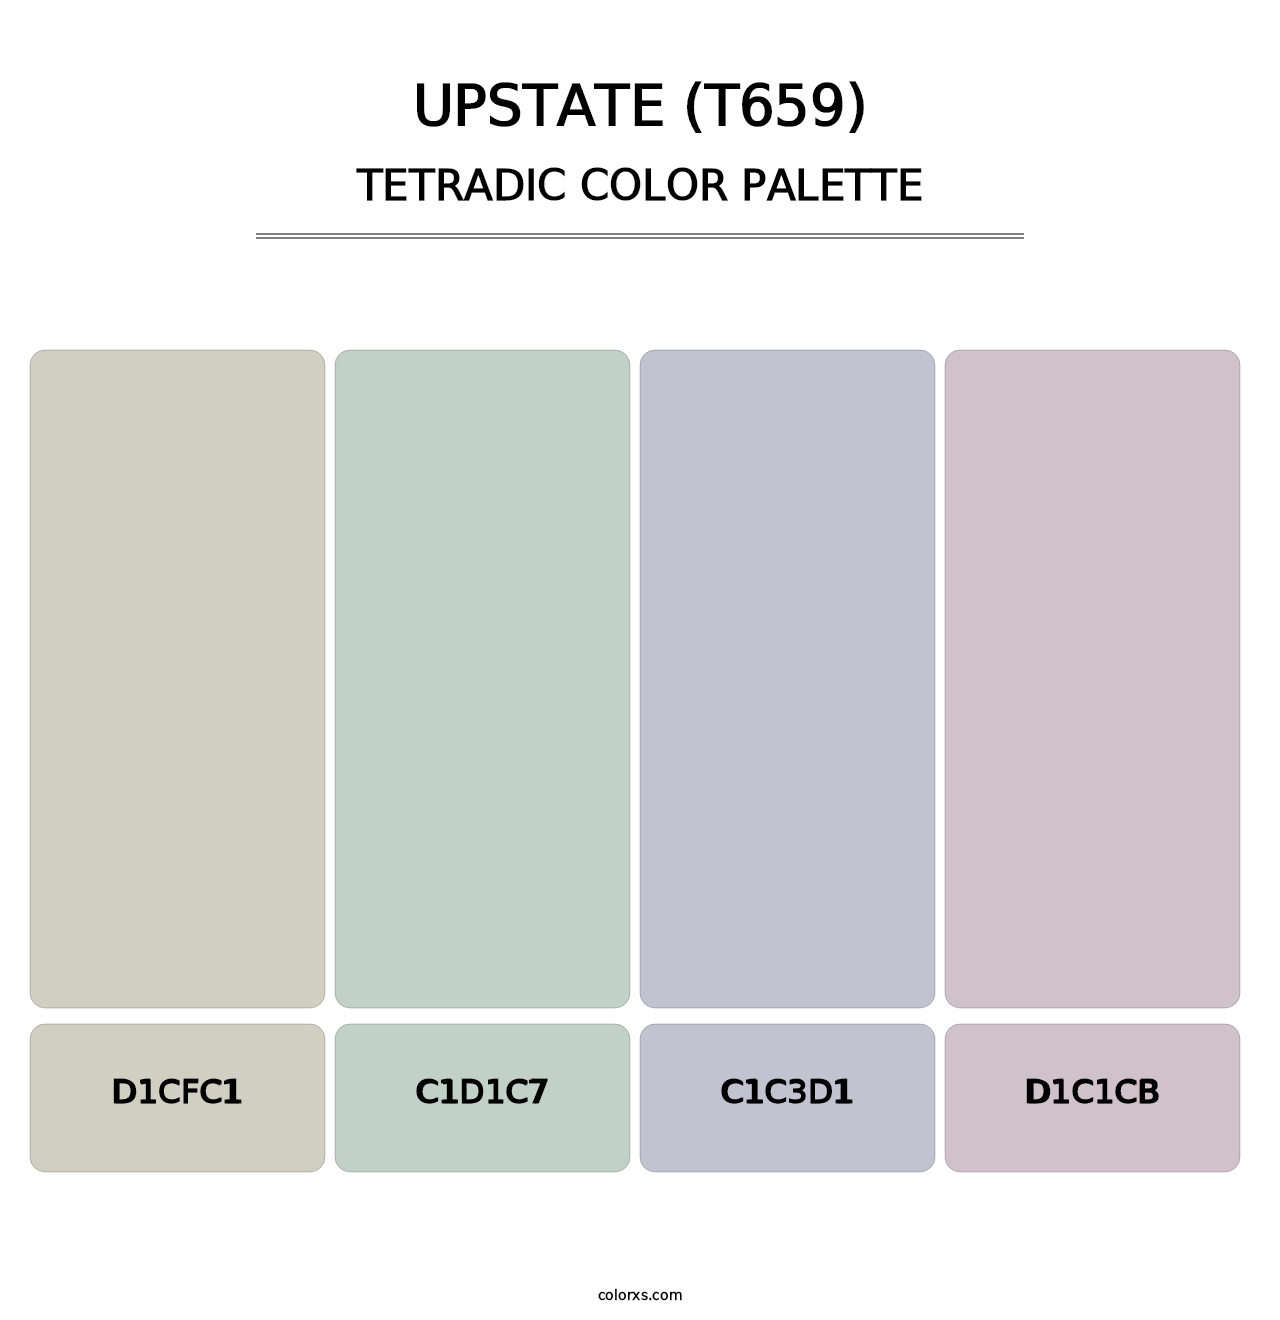 Upstate (T659) - Tetradic Color Palette